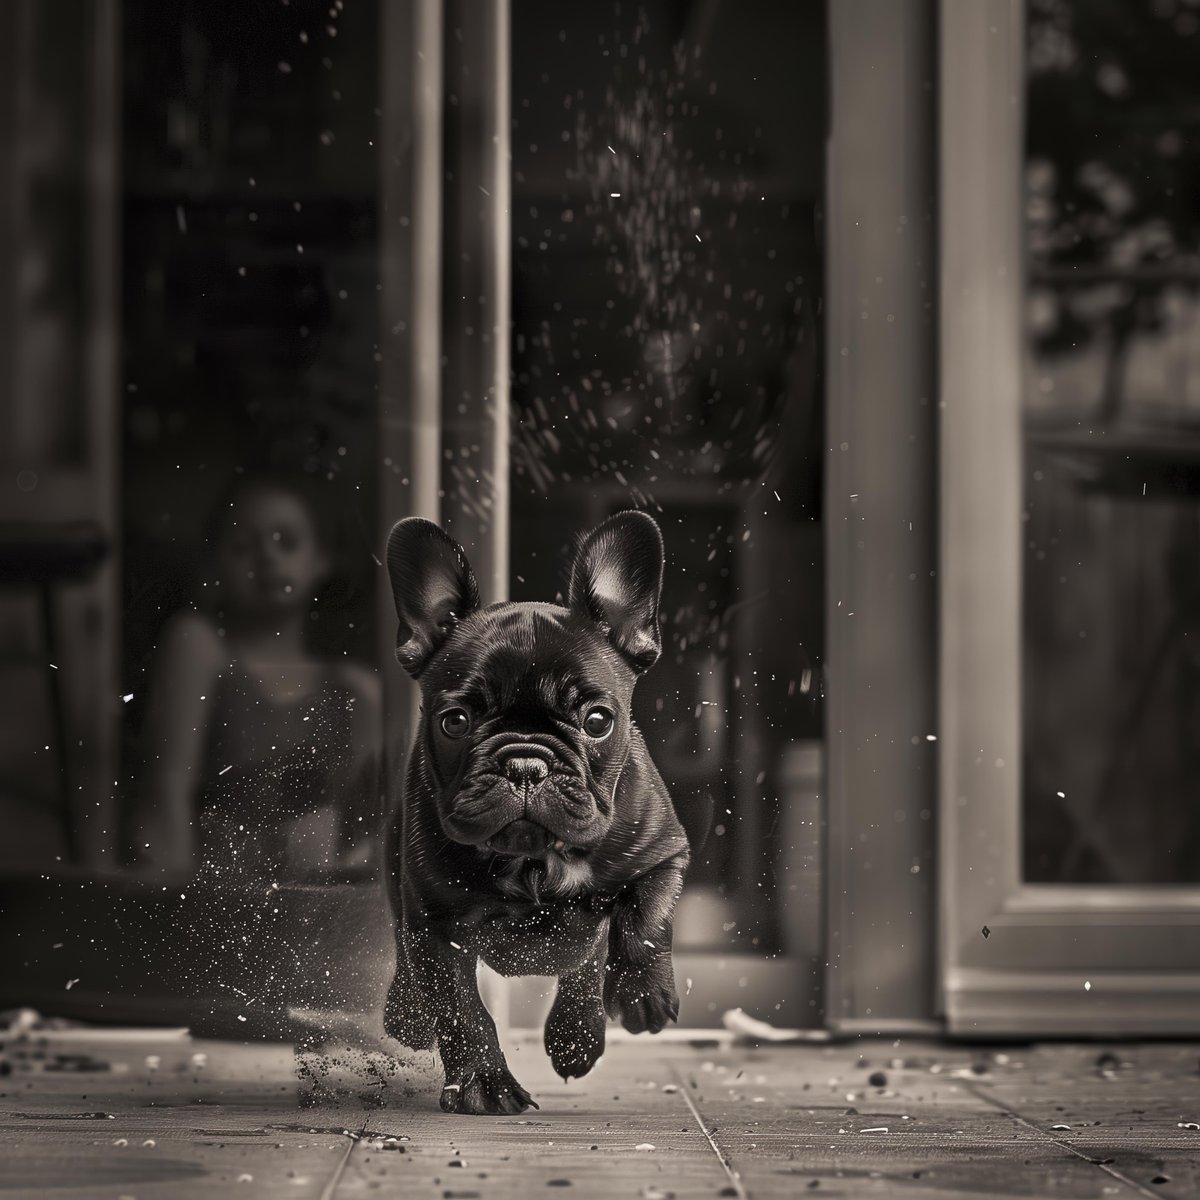 Chase the Moment

#ActionShot #FrenchBulldogFun #DynamicPets #PlayfulPup